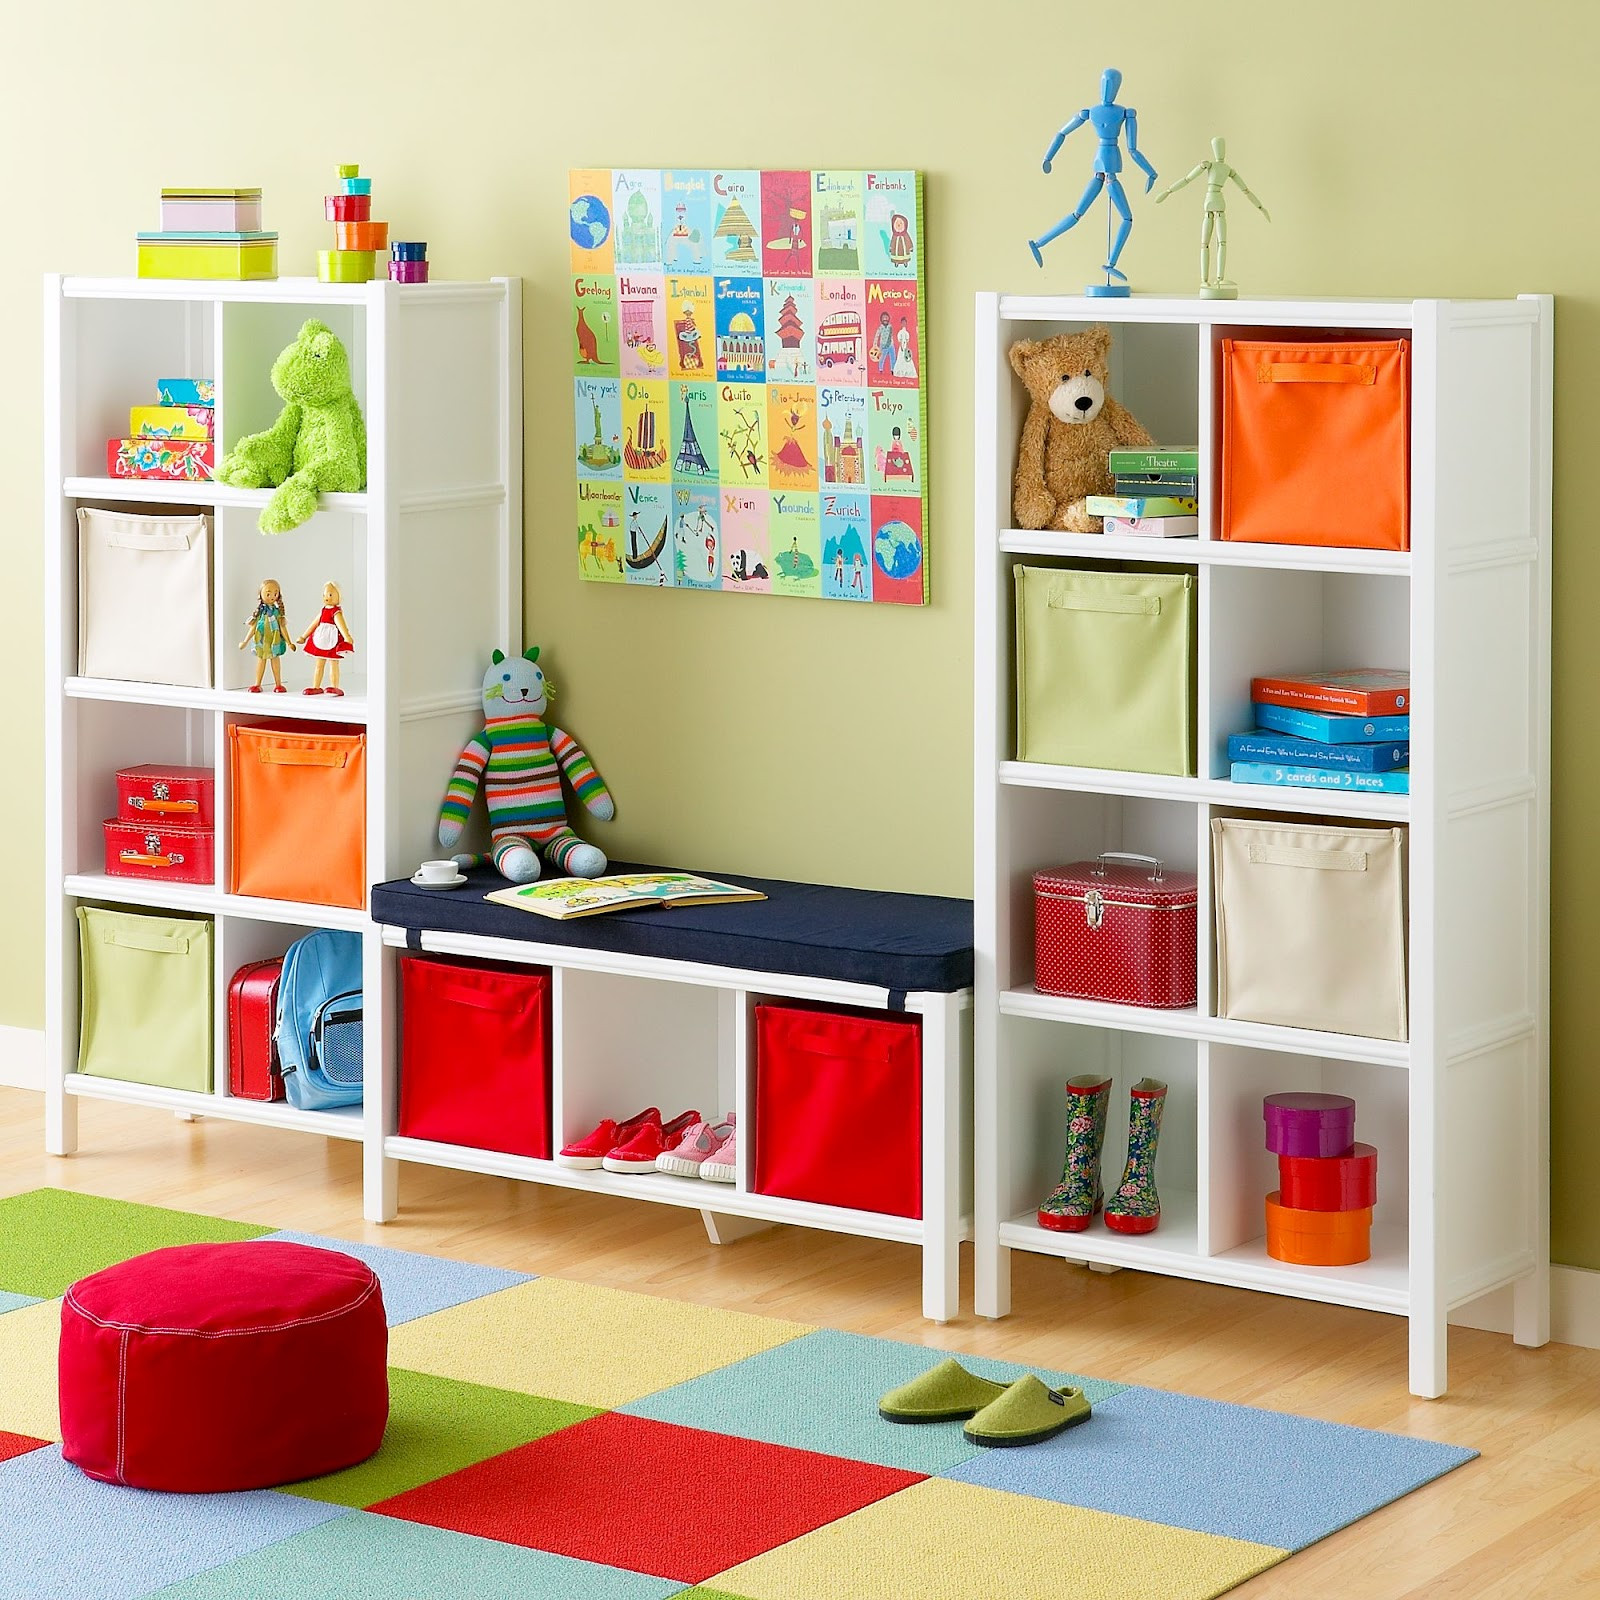 Childrens Storage Furniture
 Cube storage in primary colors child’s playroom